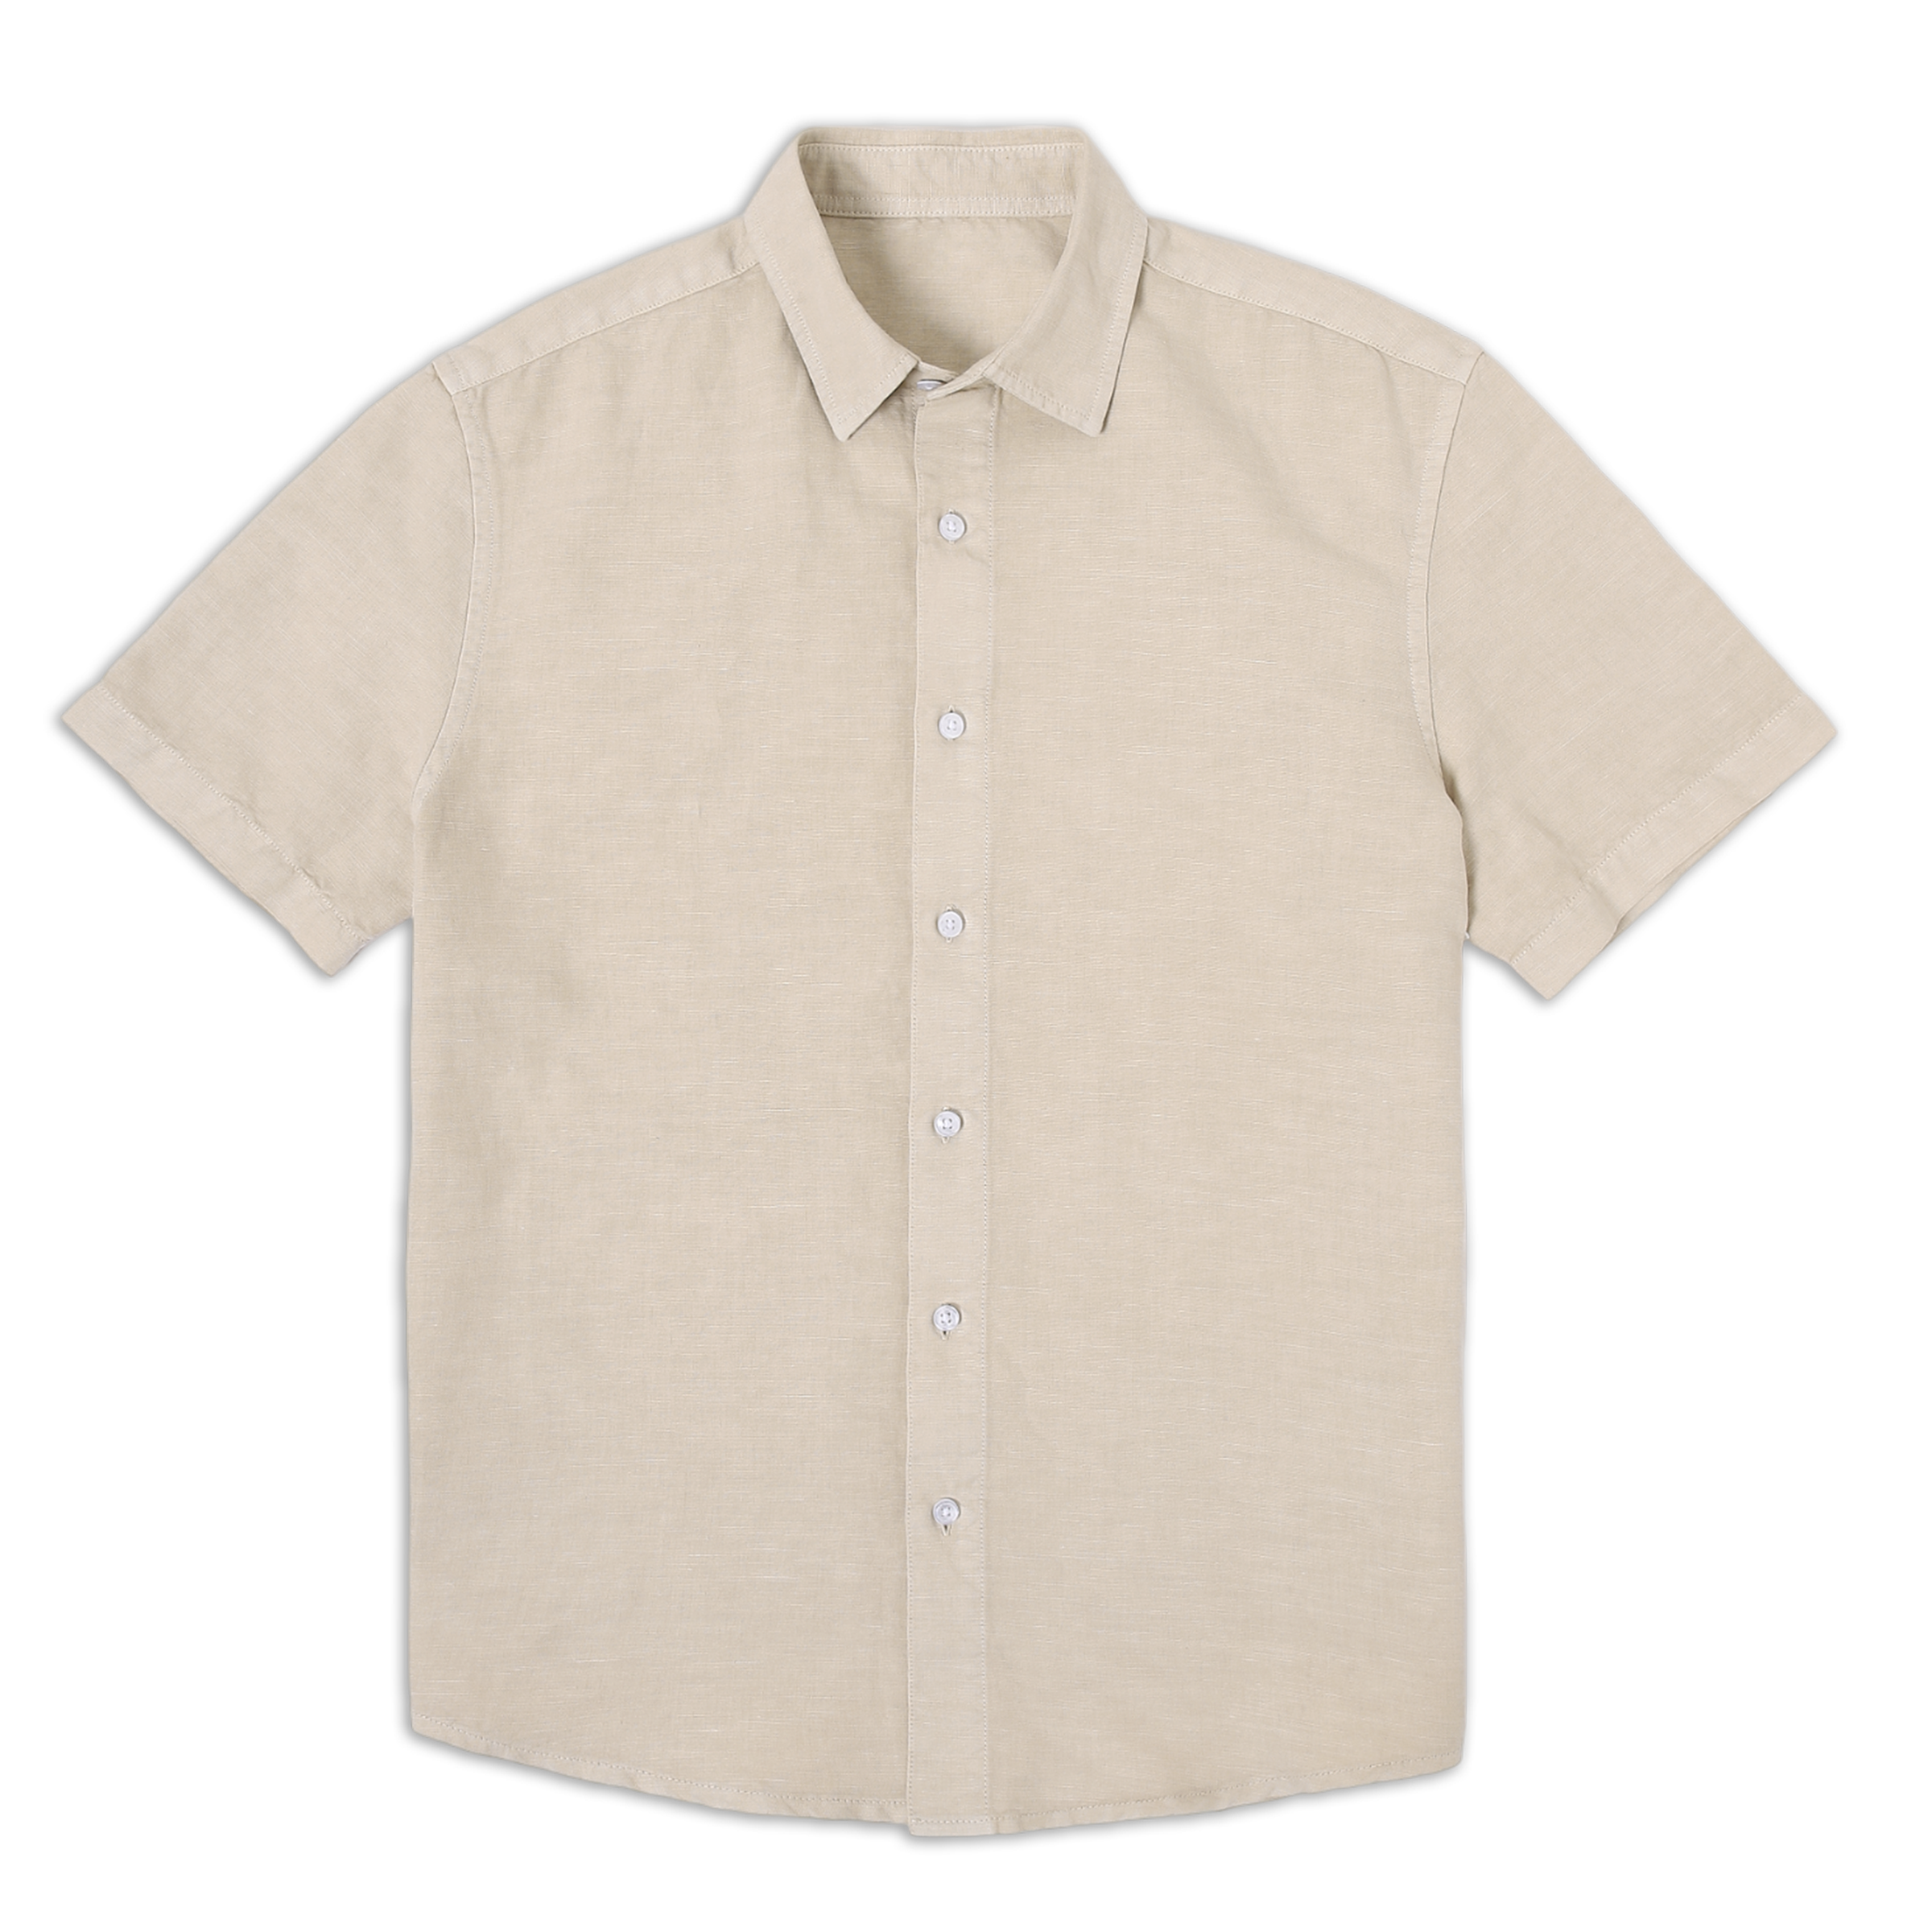 Retreat Linen Shirt Beige front with collar, white buttons, and short sleeves